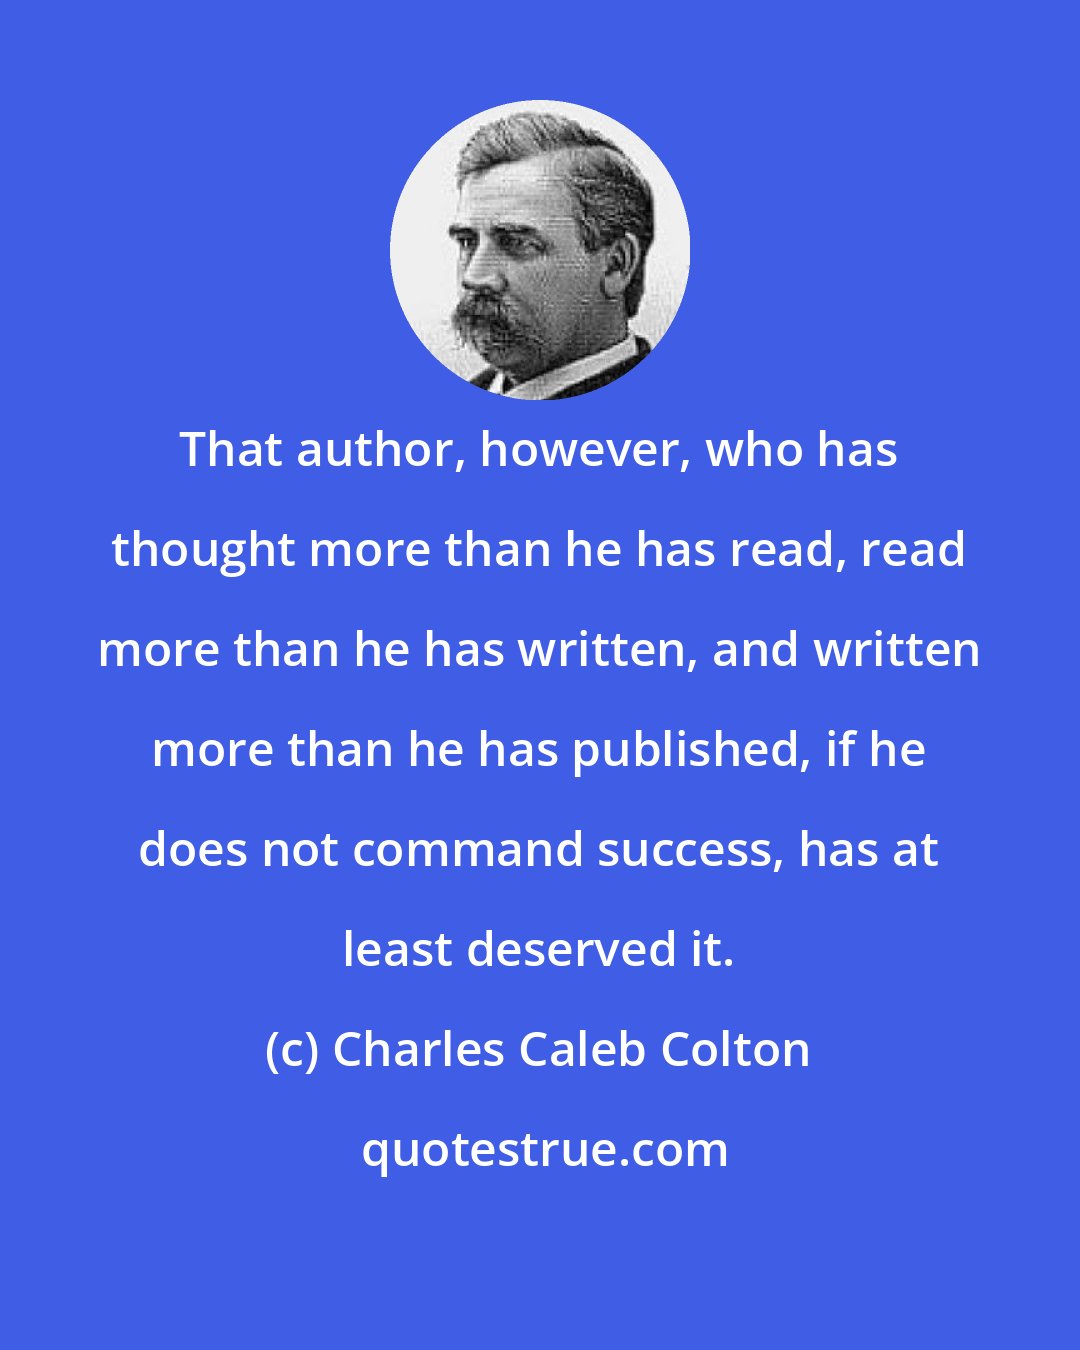 Charles Caleb Colton: That author, however, who has thought more than he has read, read more than he has written, and written more than he has published, if he does not command success, has at least deserved it.